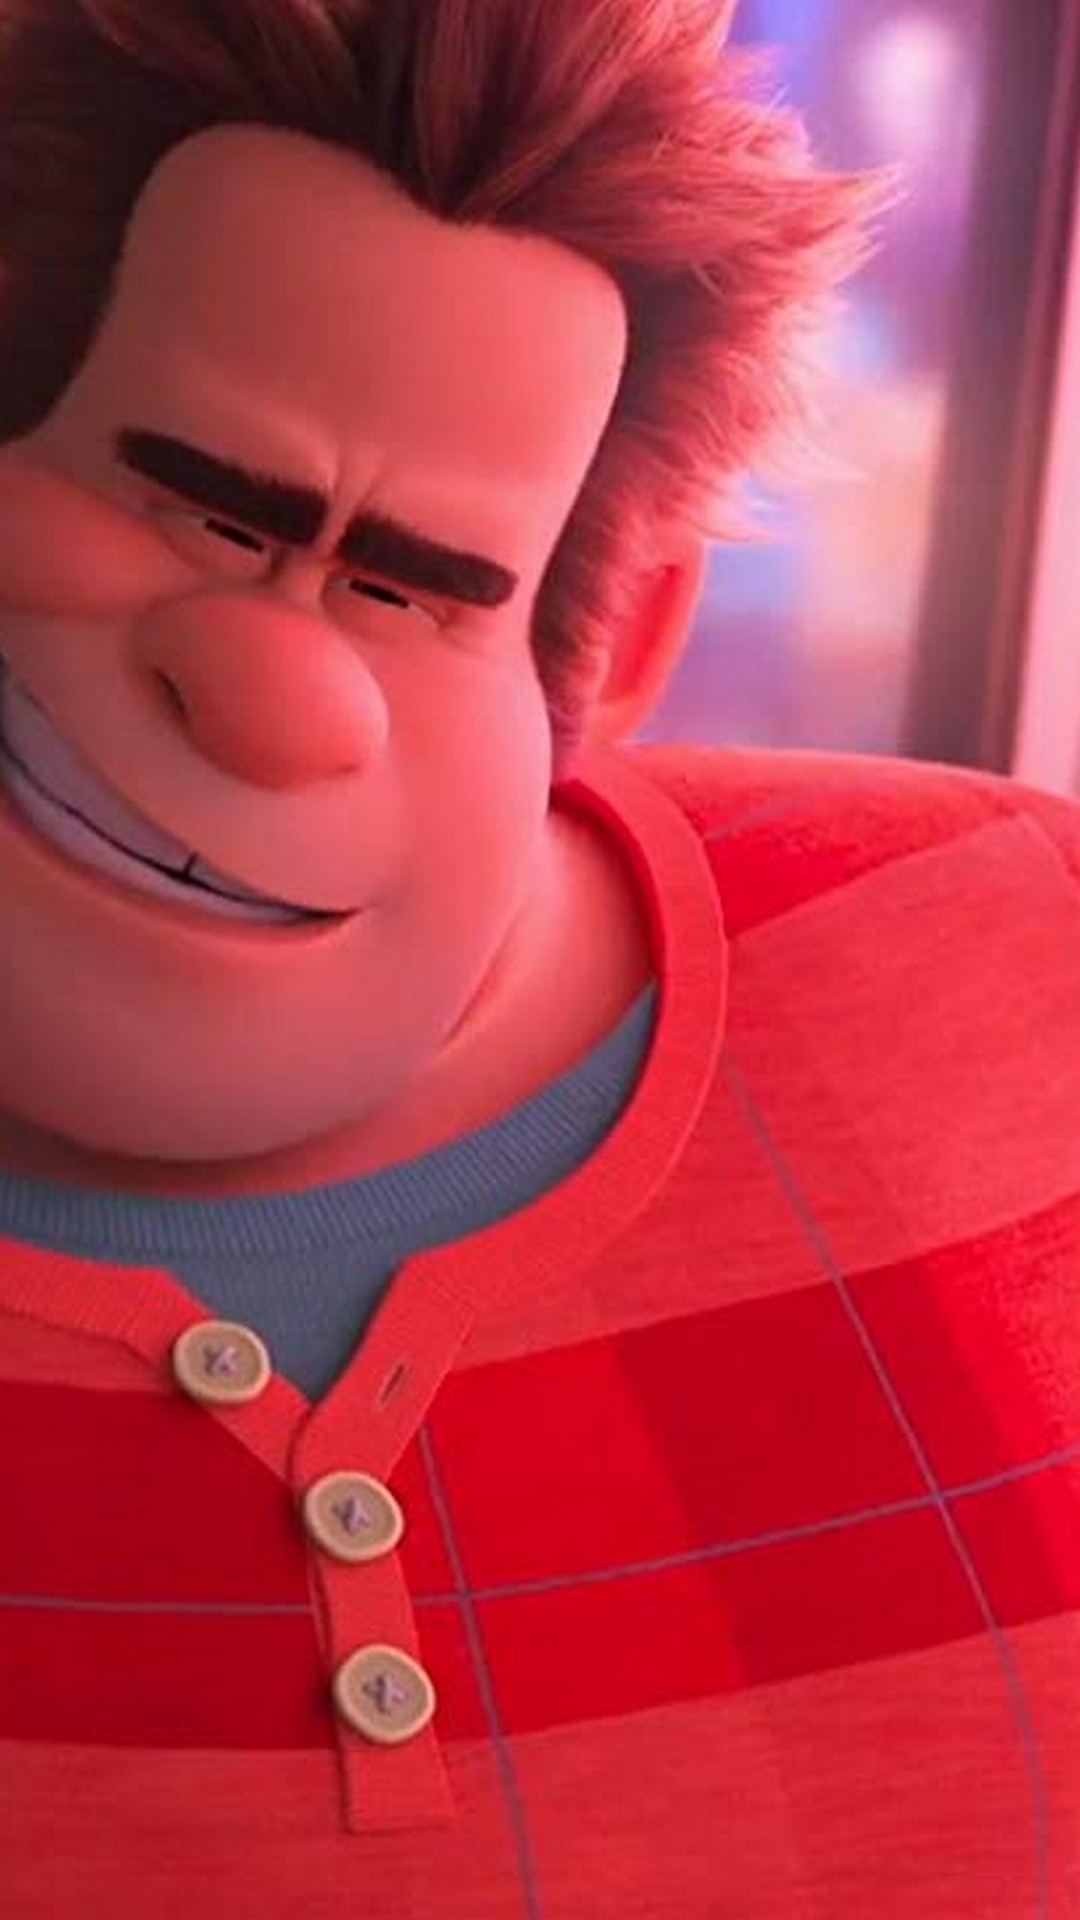 Wreck-It Ralph 2 2018 iPhone 7 Wallpaper With Resolution 1080X1920 pixel. You can make this wallpaper for your Mac or Windows Desktop Background, iPhone, Android or Tablet and another Smartphone device for free